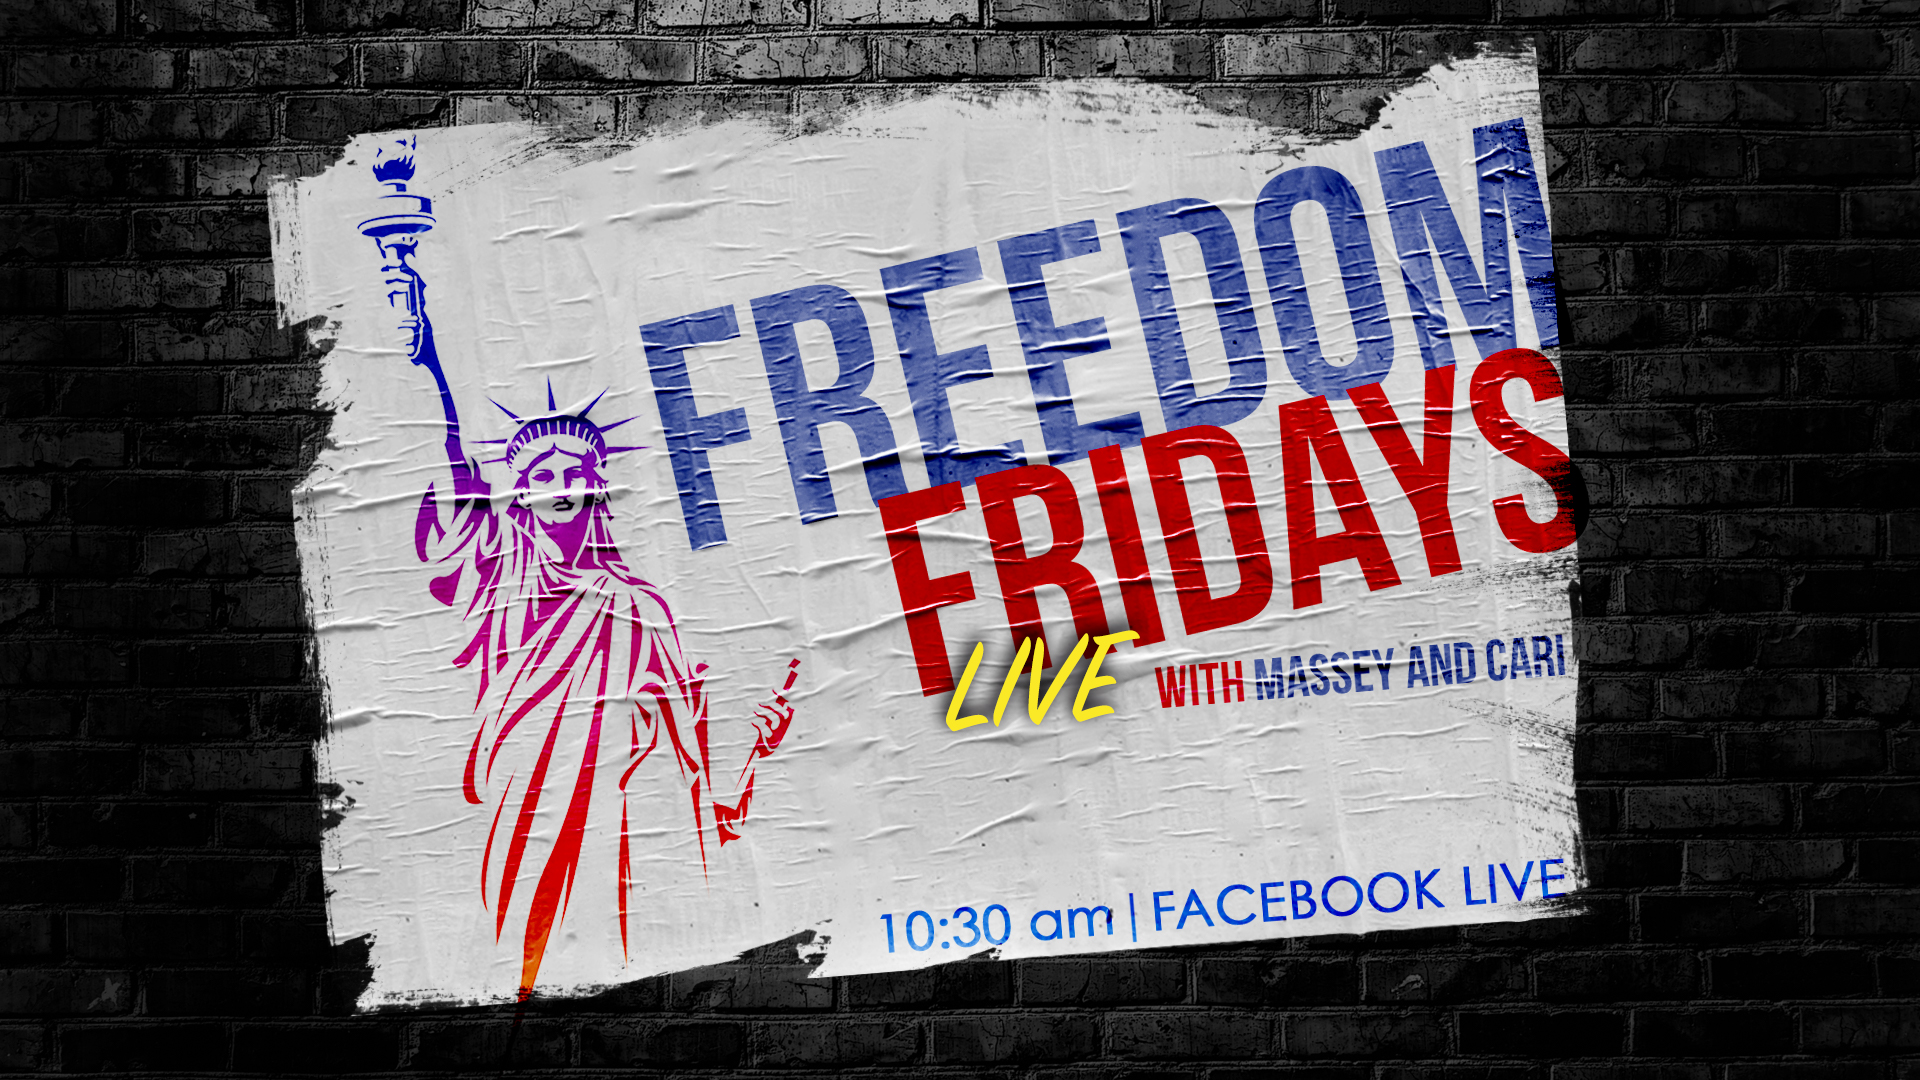 Freedom Fridays – Live with Massey and Cari